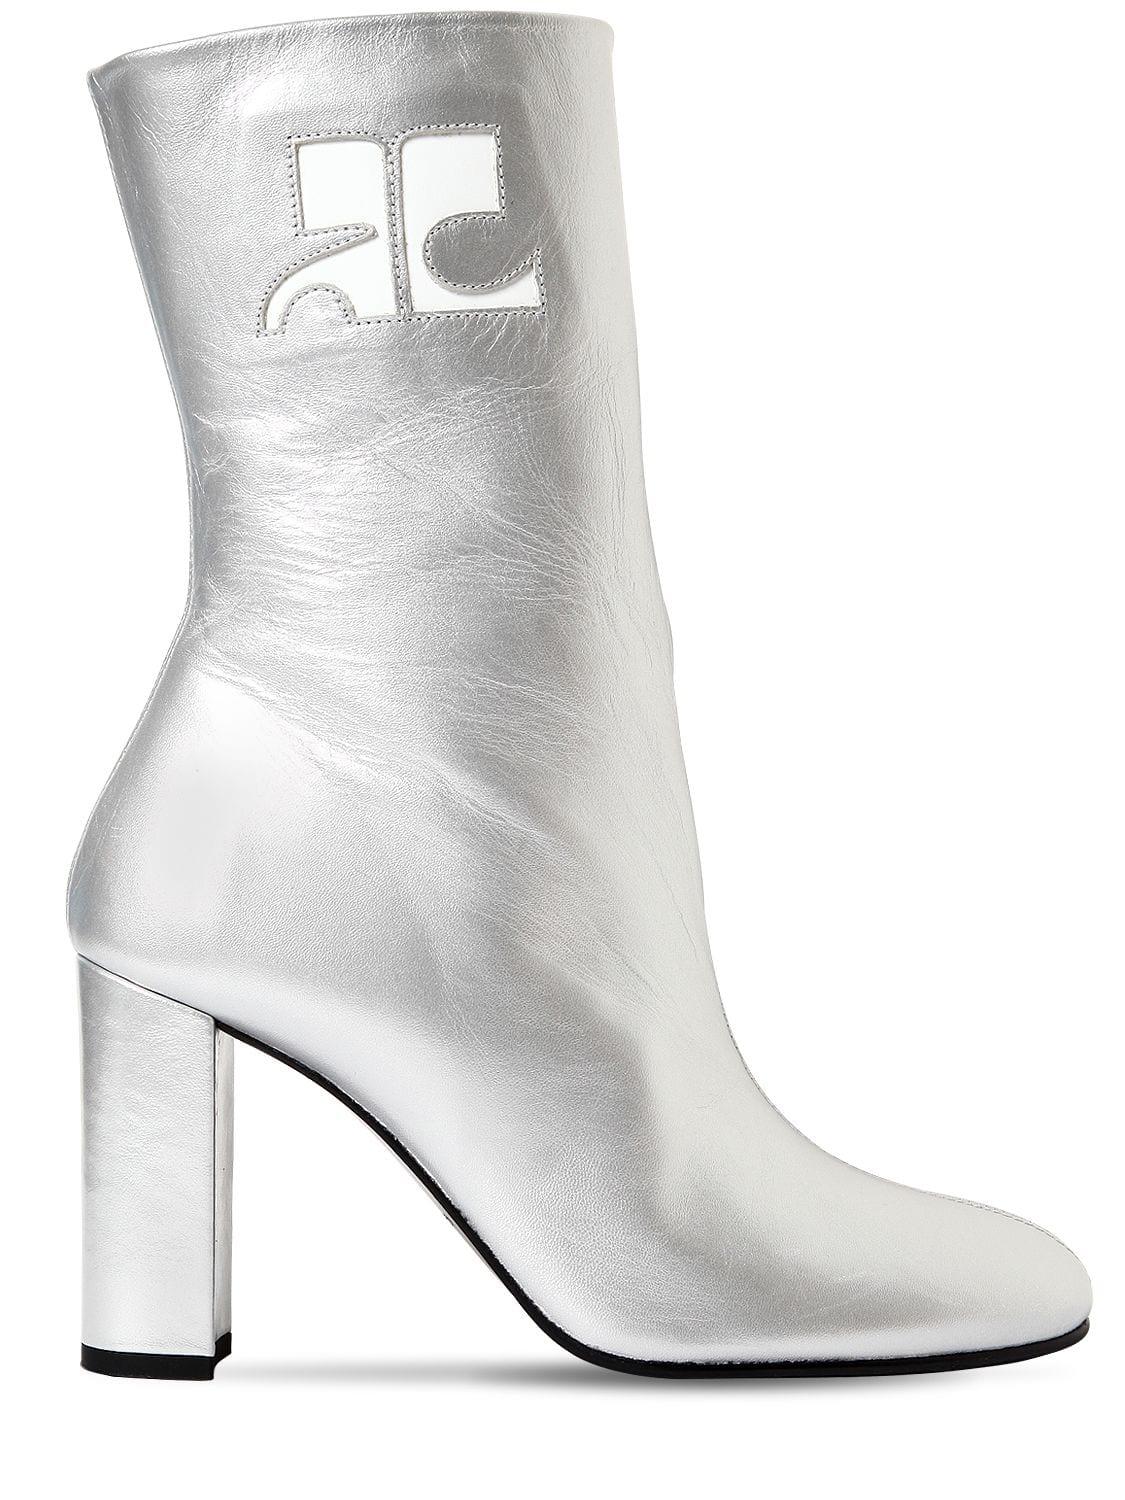 Courreges 100mm Metallic Leather Ankle Boots - Lyst